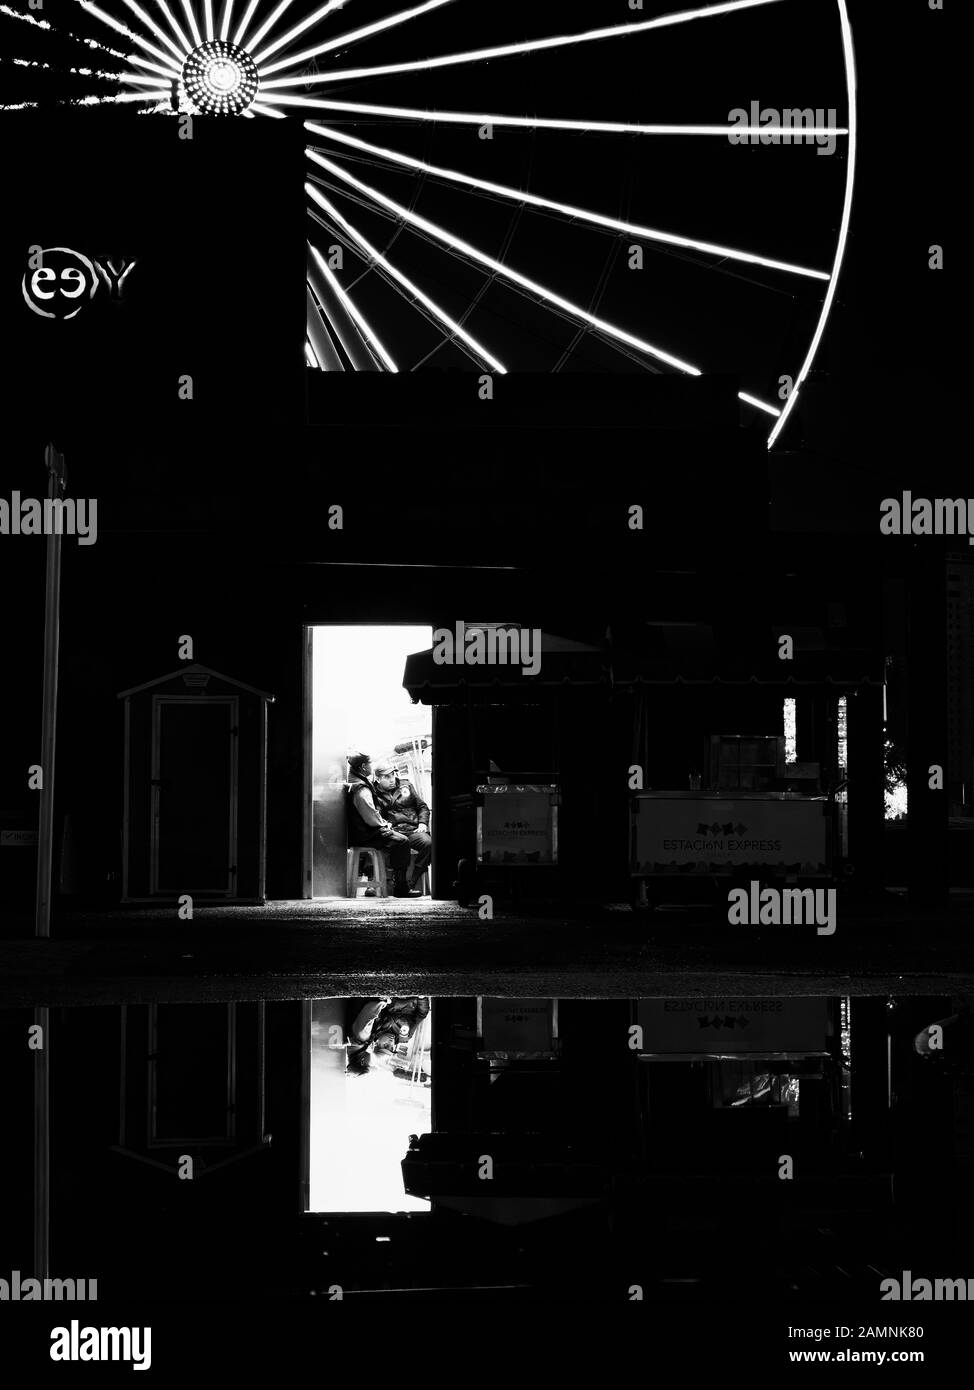 Puebla de Zaragoza, October 12, 2018 - Monochrome scene of modern building with two man and ferris wheel reflections in the water after the rain at night. Stock Photo